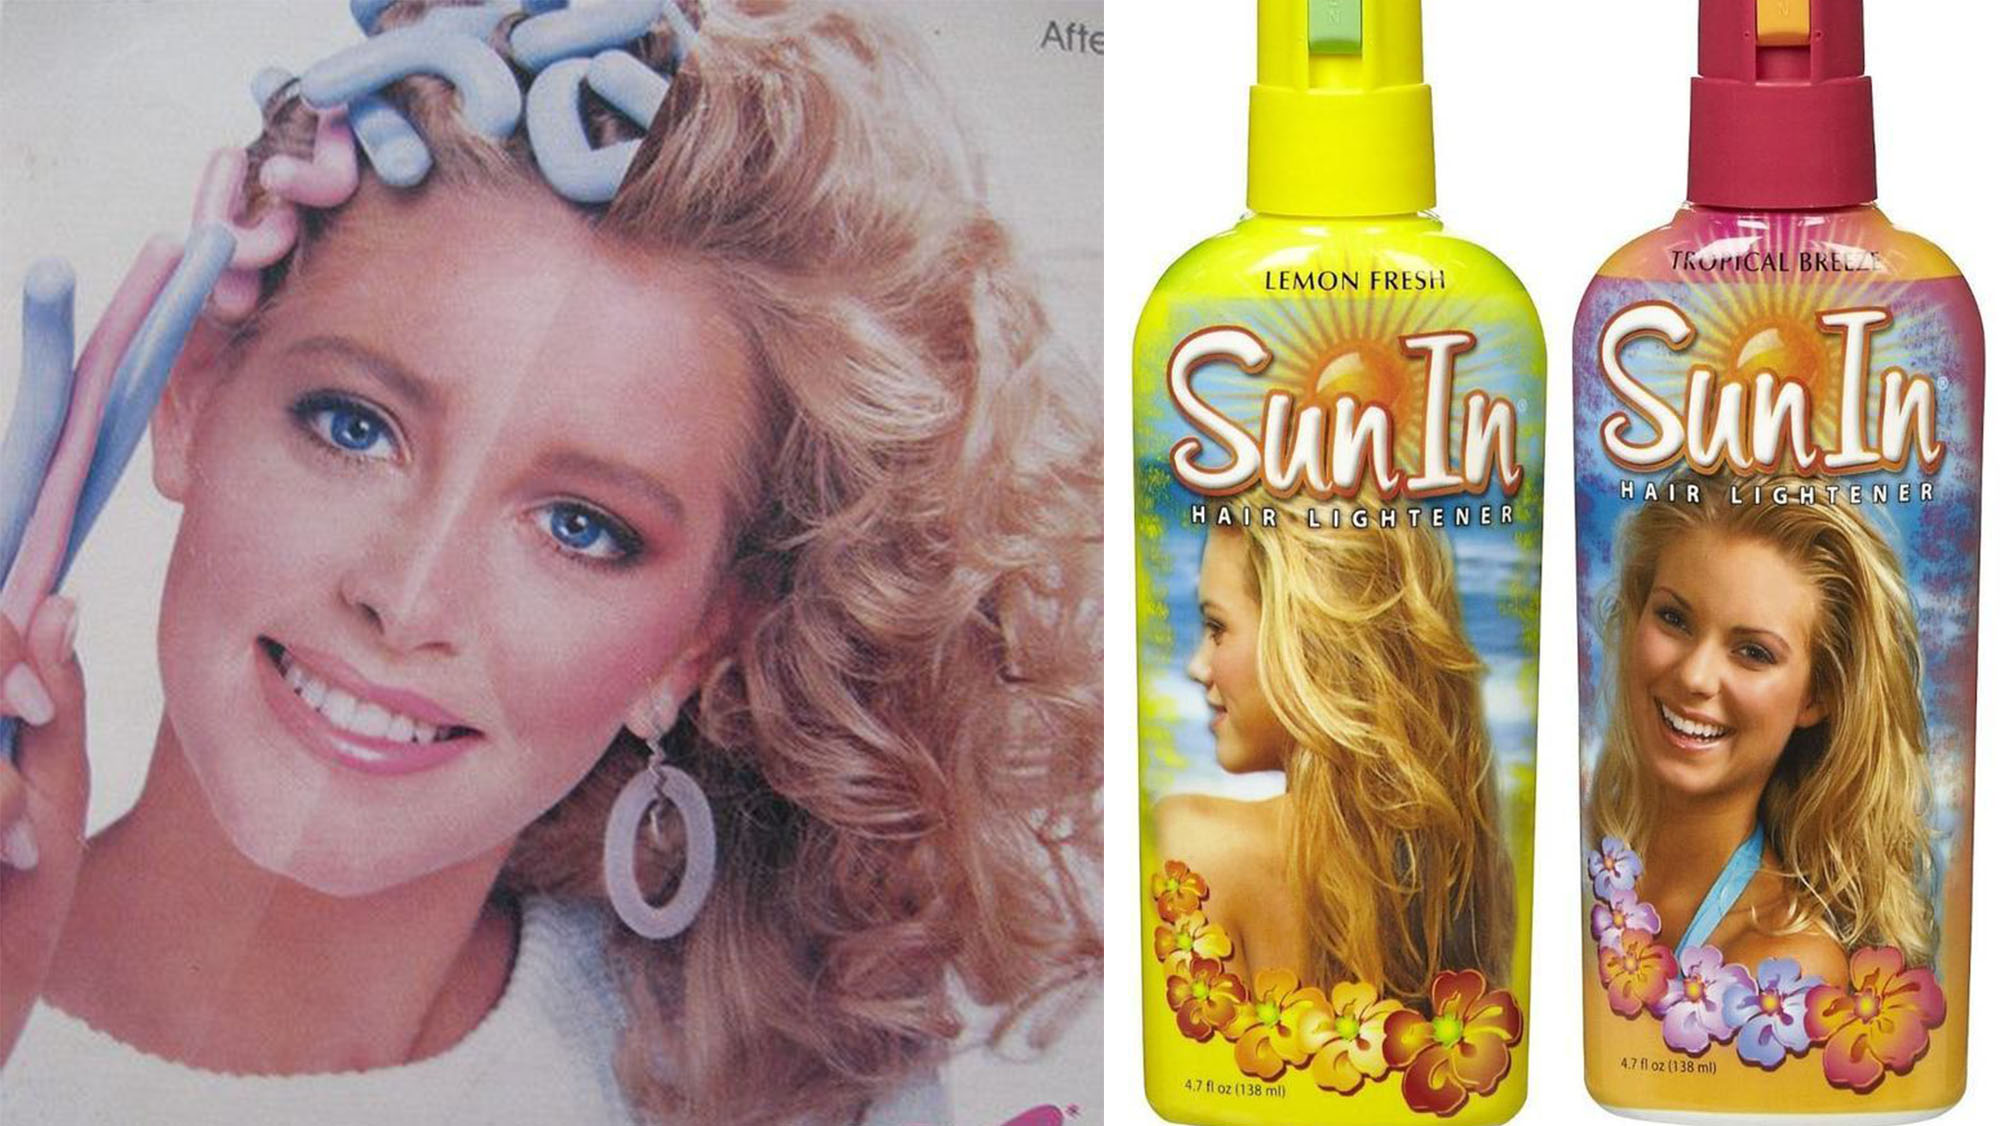 Cult beauty products from the 80s and 90s OverSixty